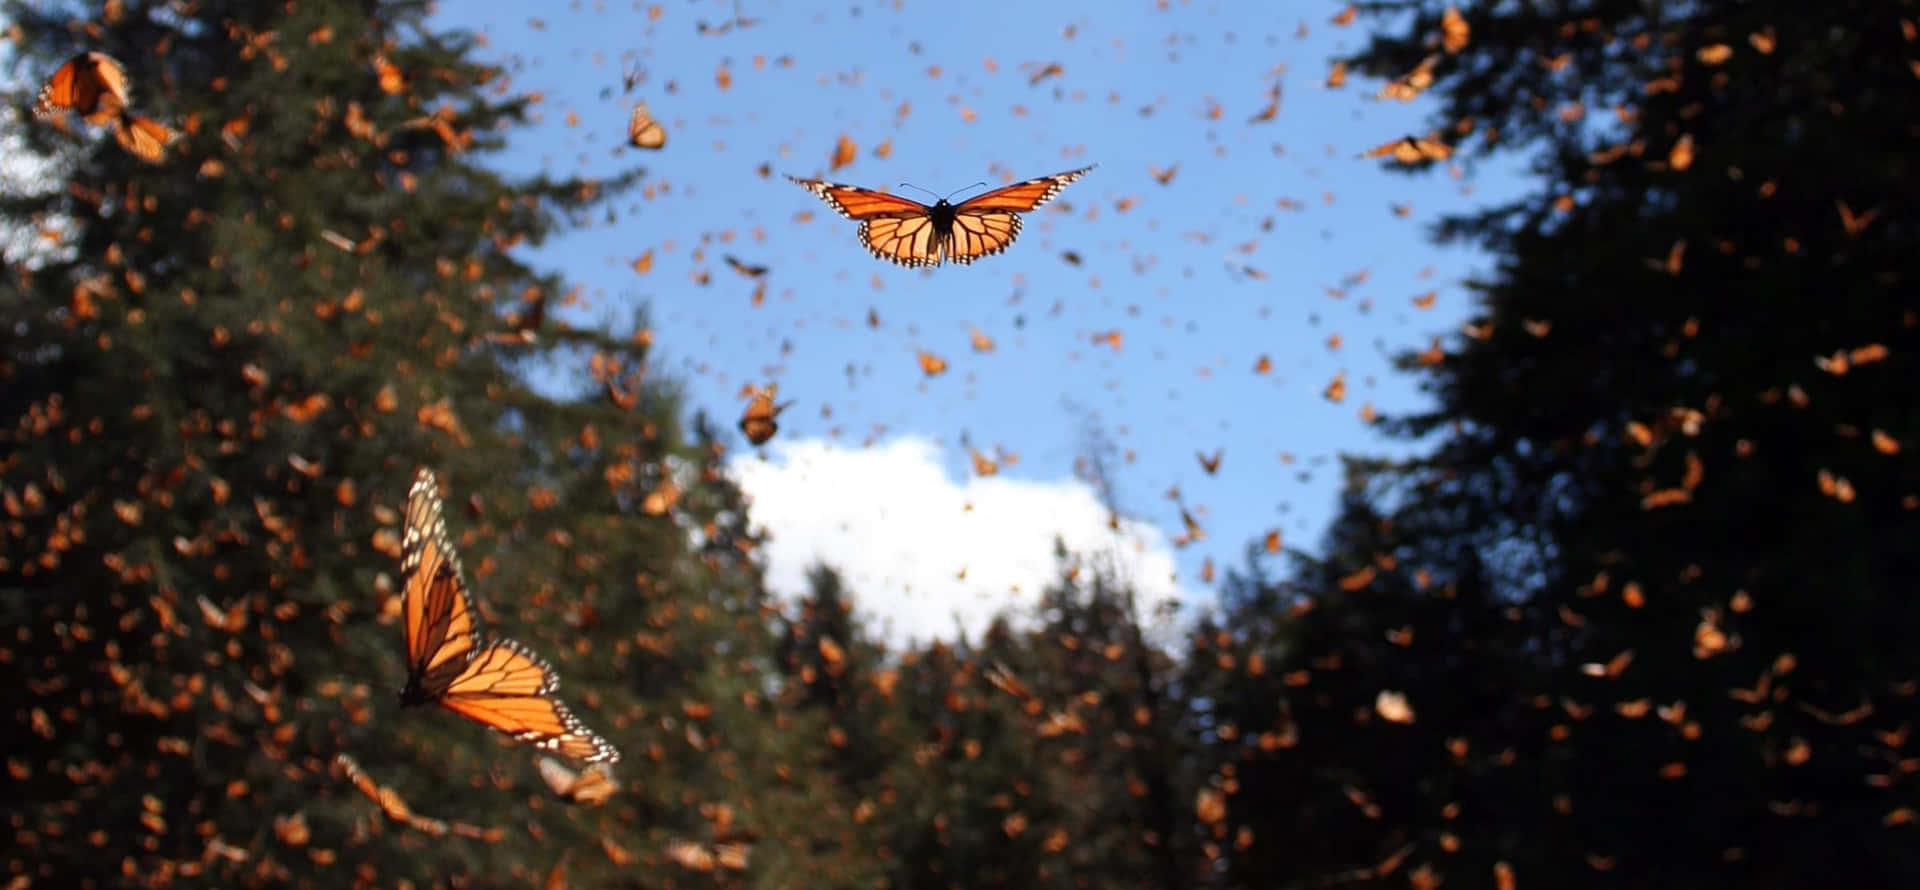 Thousands of monarch butterflies migrate alongside each other in a colorful show of nature's grandeur. Wallpaper